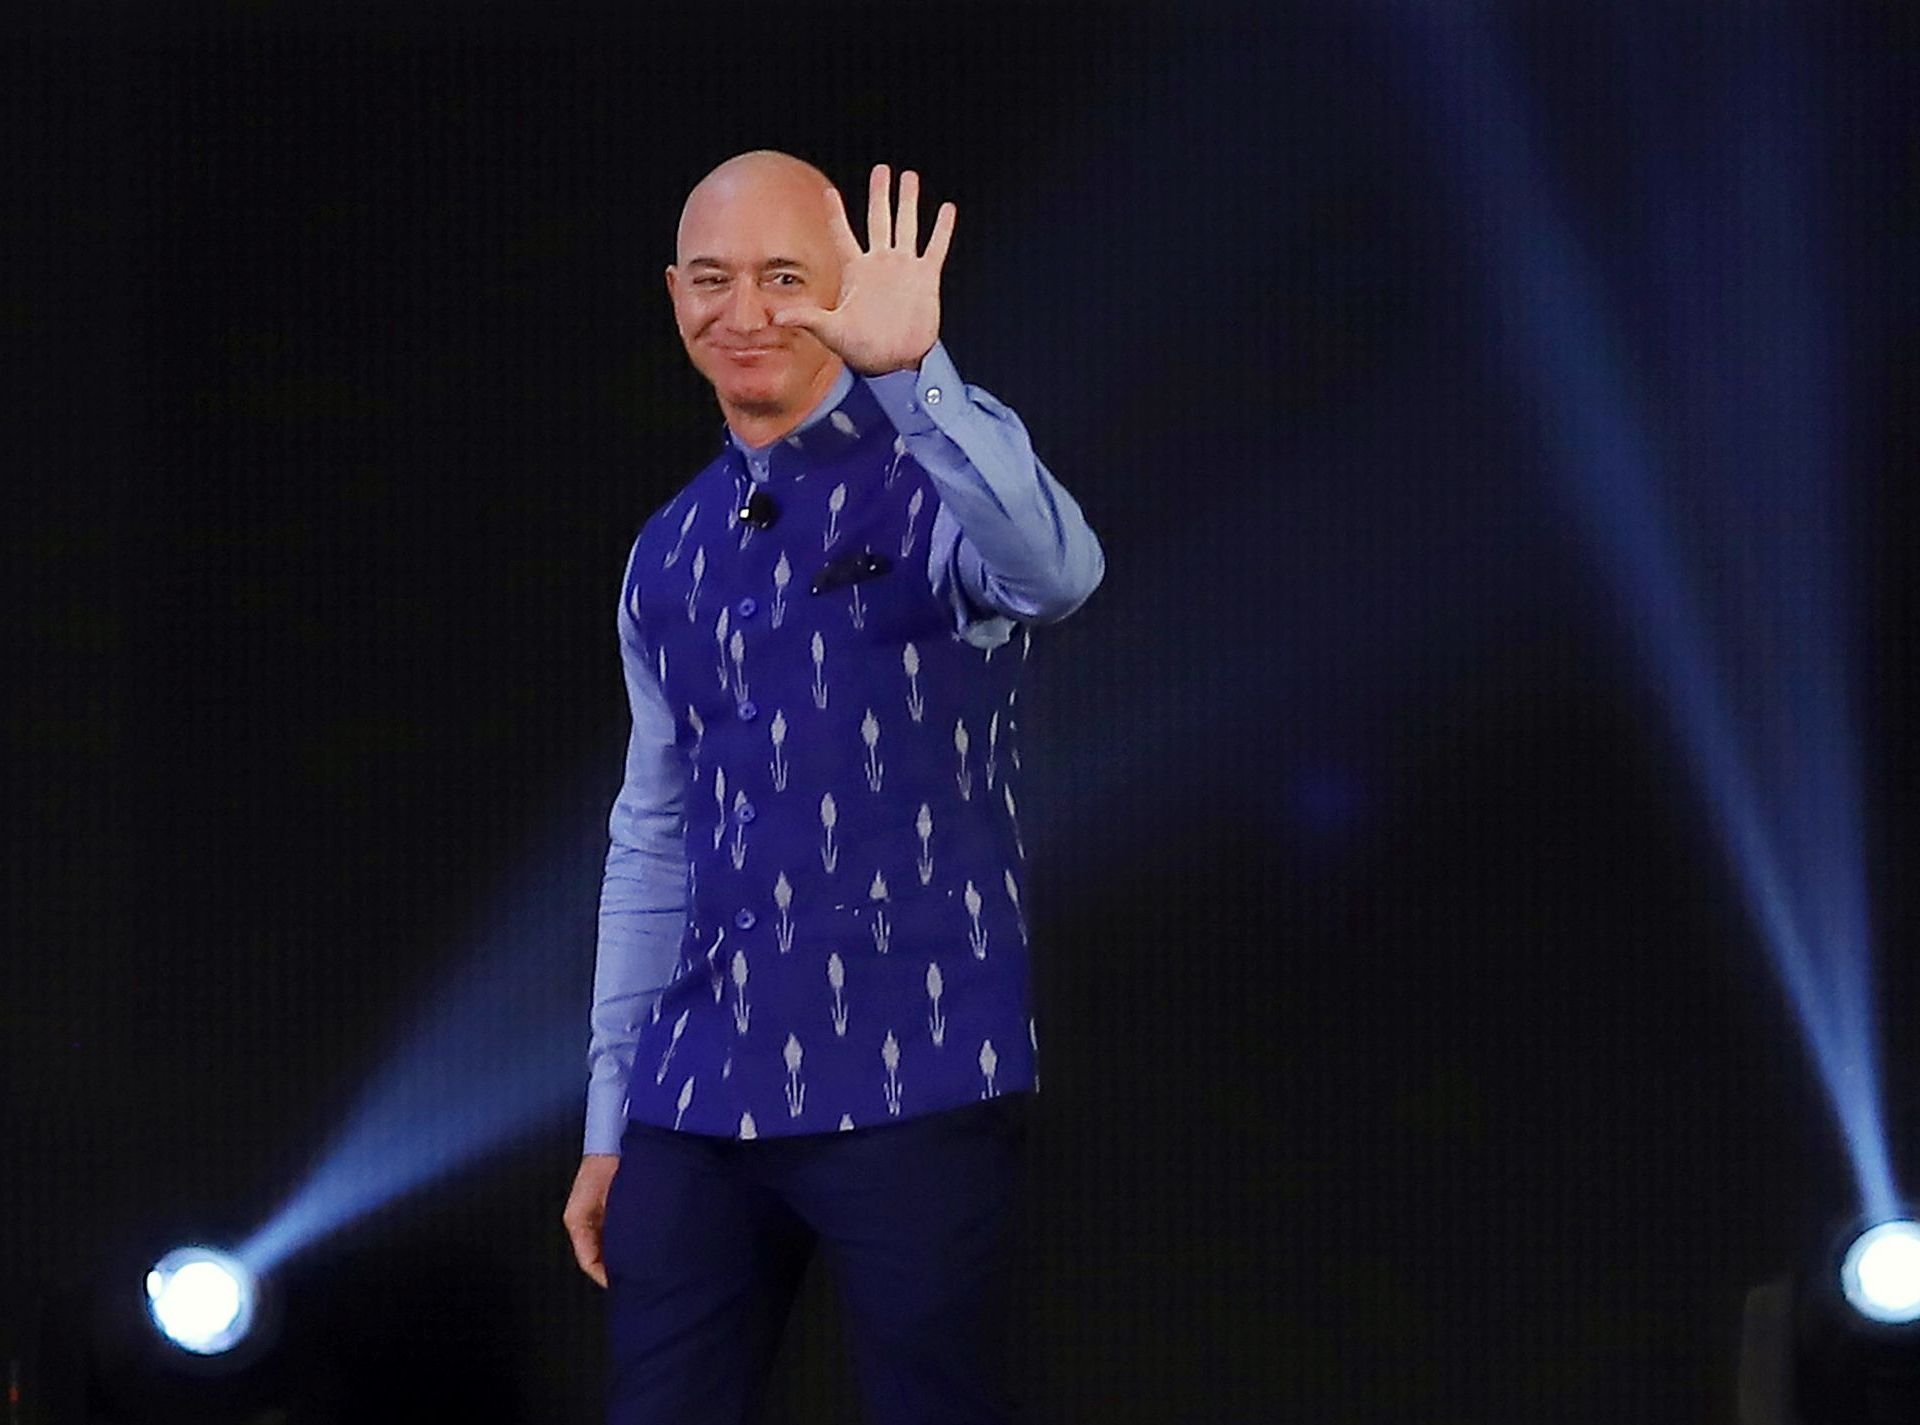 Bezos legacy gets mixed reviews as he exits Amazon CEO role